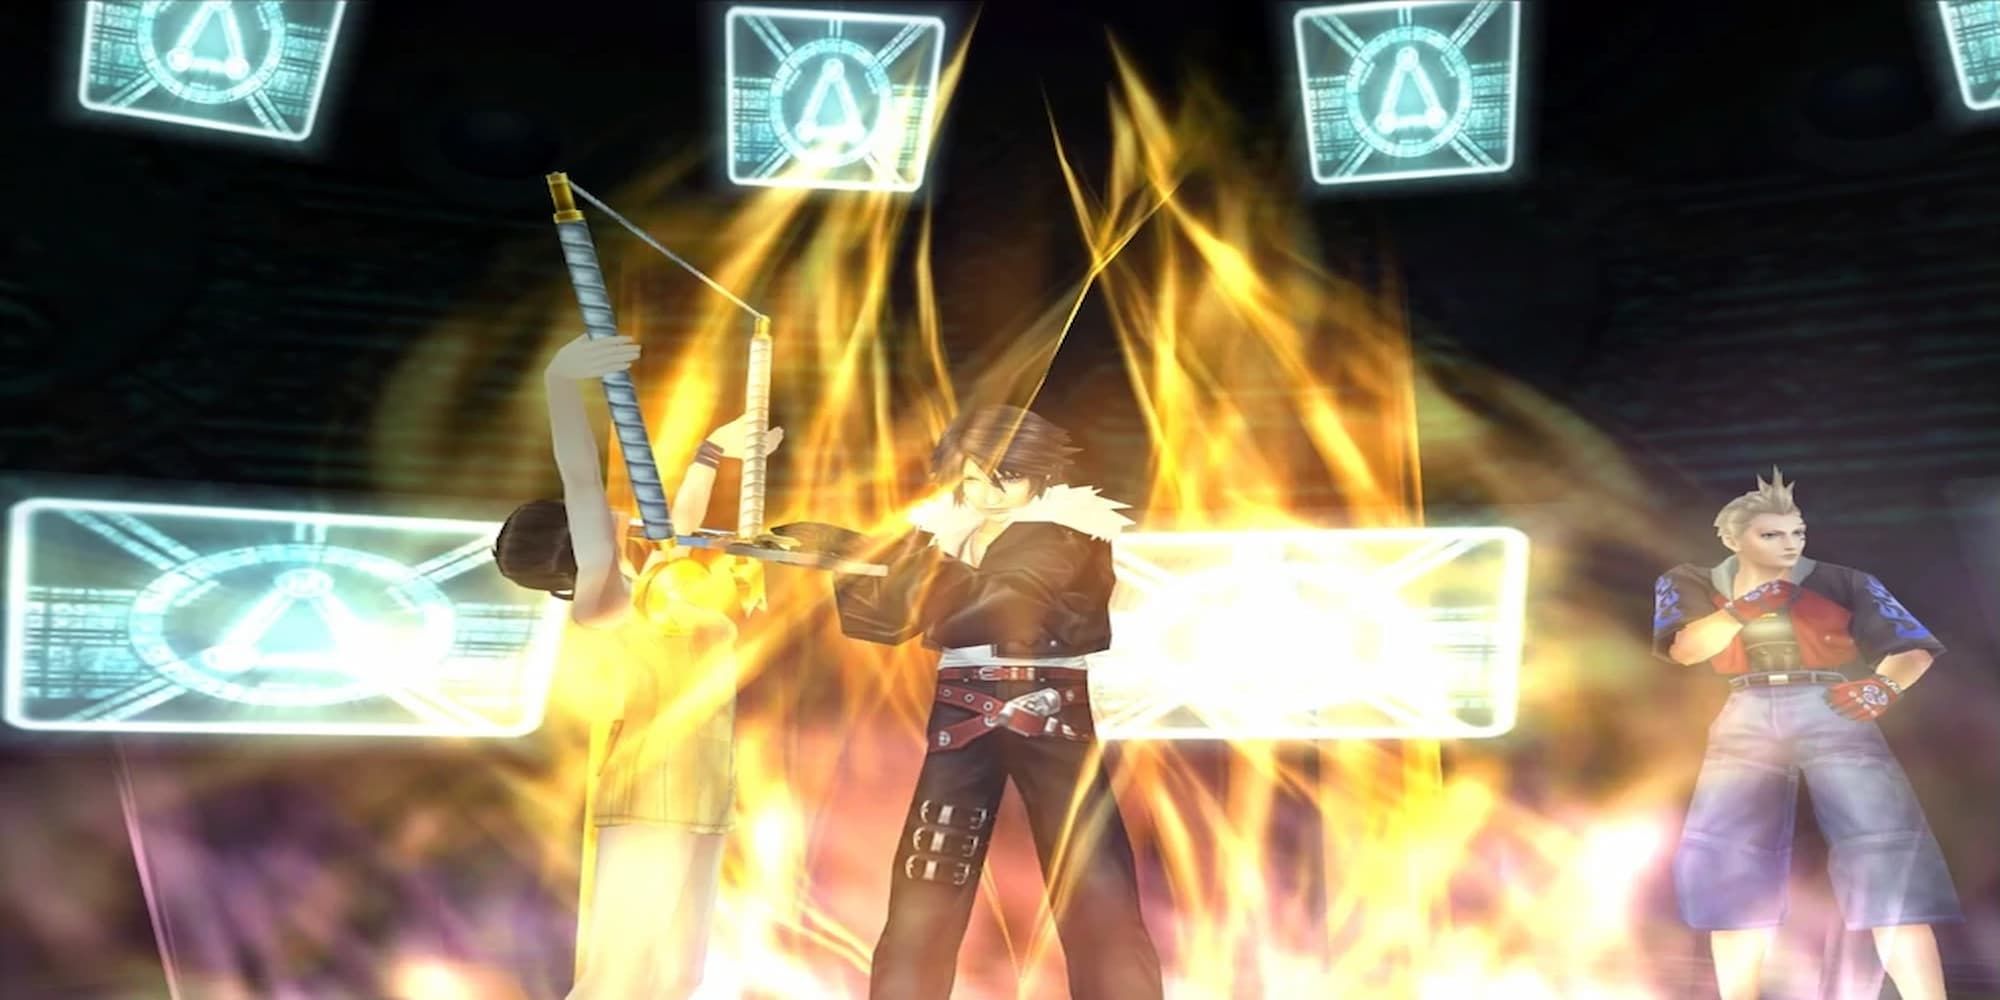 FF8 Aura squall in dark room surrounded by screens facing camera and weapon posed up wrapped in golden spell aura